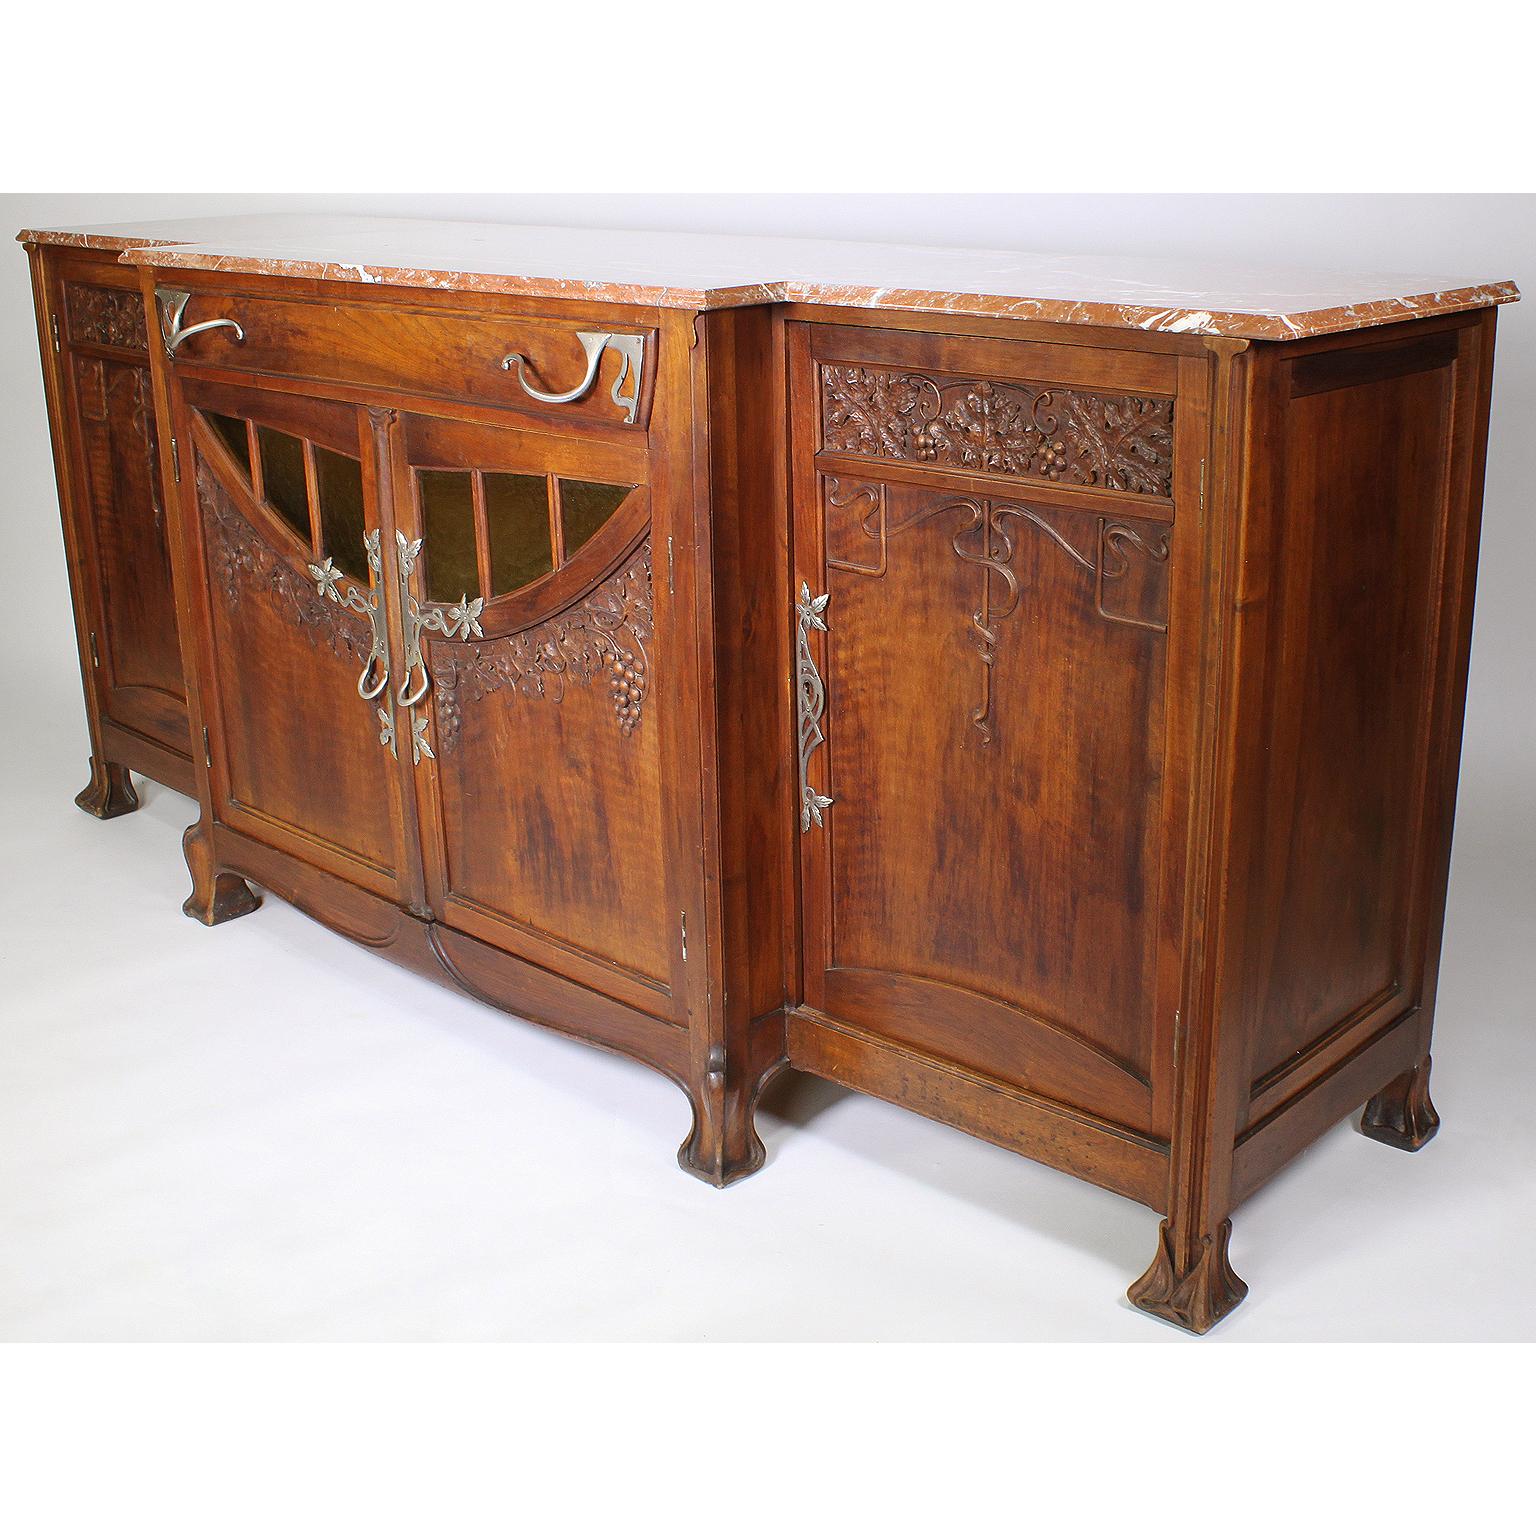 A fine Italian 19th-20th century Art Nouveau carved walnut buffet server by Vittorio Valabrega (1861-1952). The finely carved walnut body with twin center doors carved with grape vines, fitted with molded yellow-Craft-glass panels above an apron